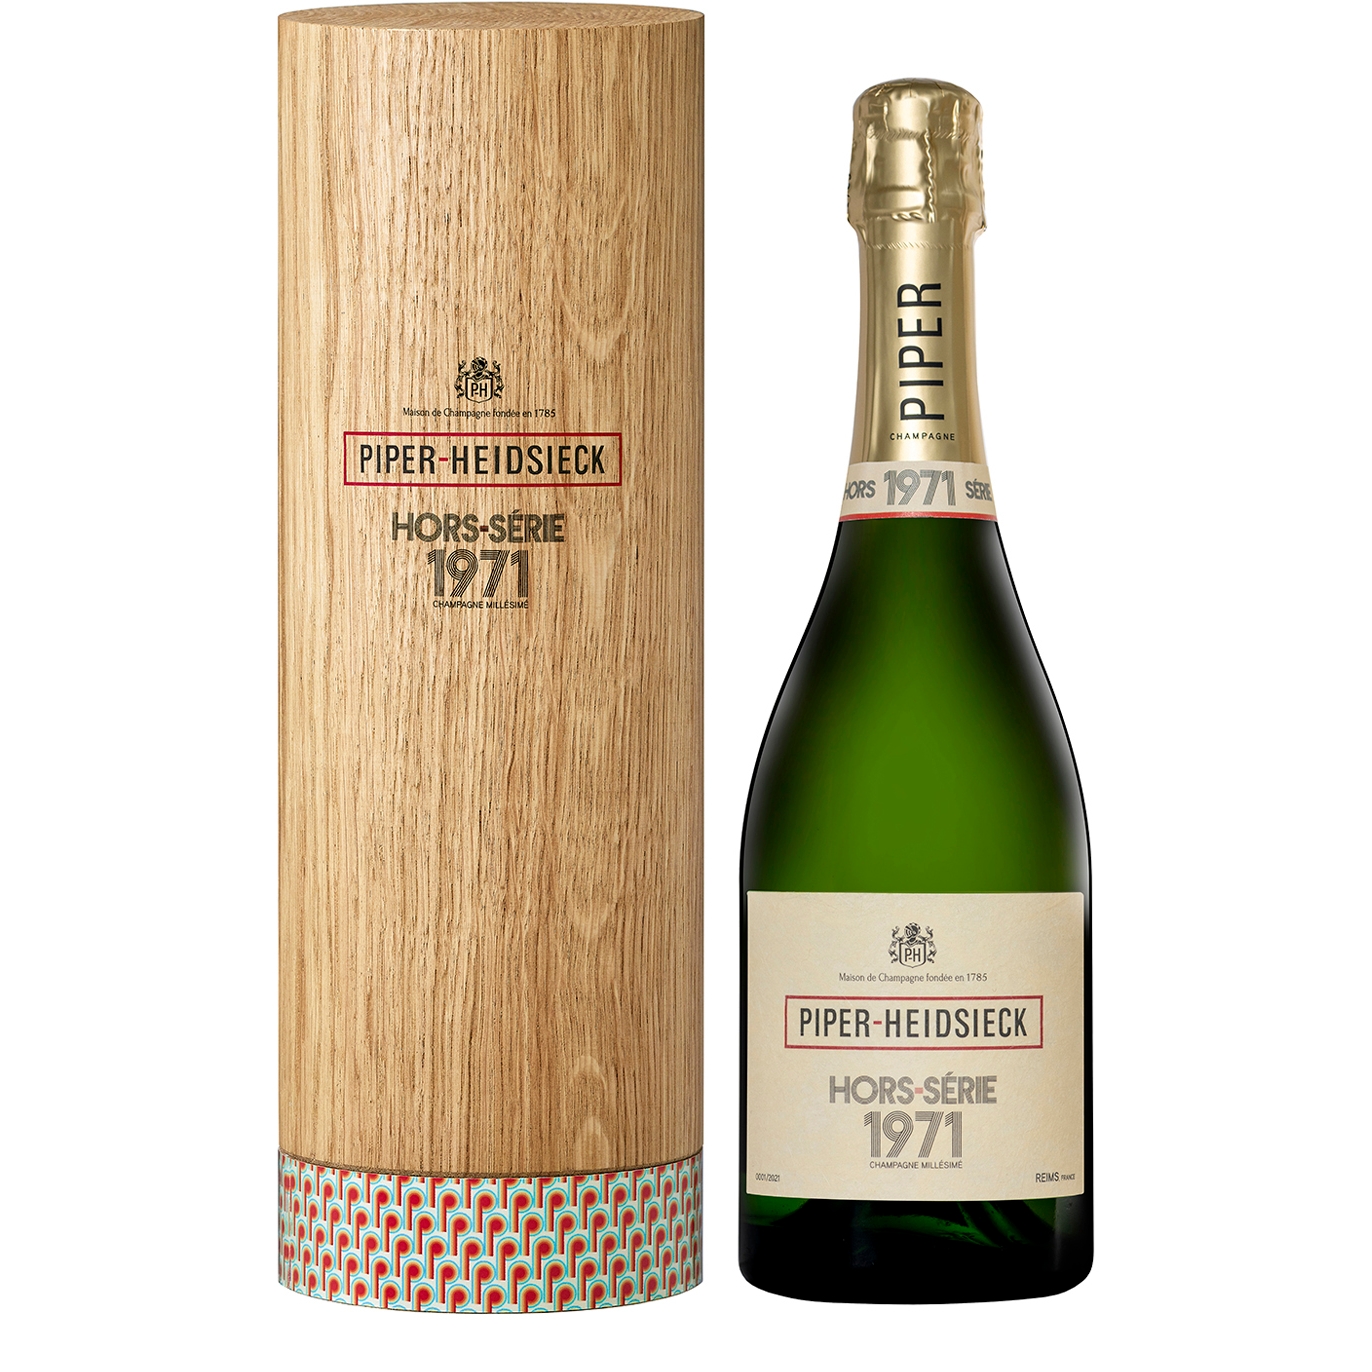 Piper Heidsieck Hors-Série Vintage Champagne 1971 Gift Box Sparkling Wine